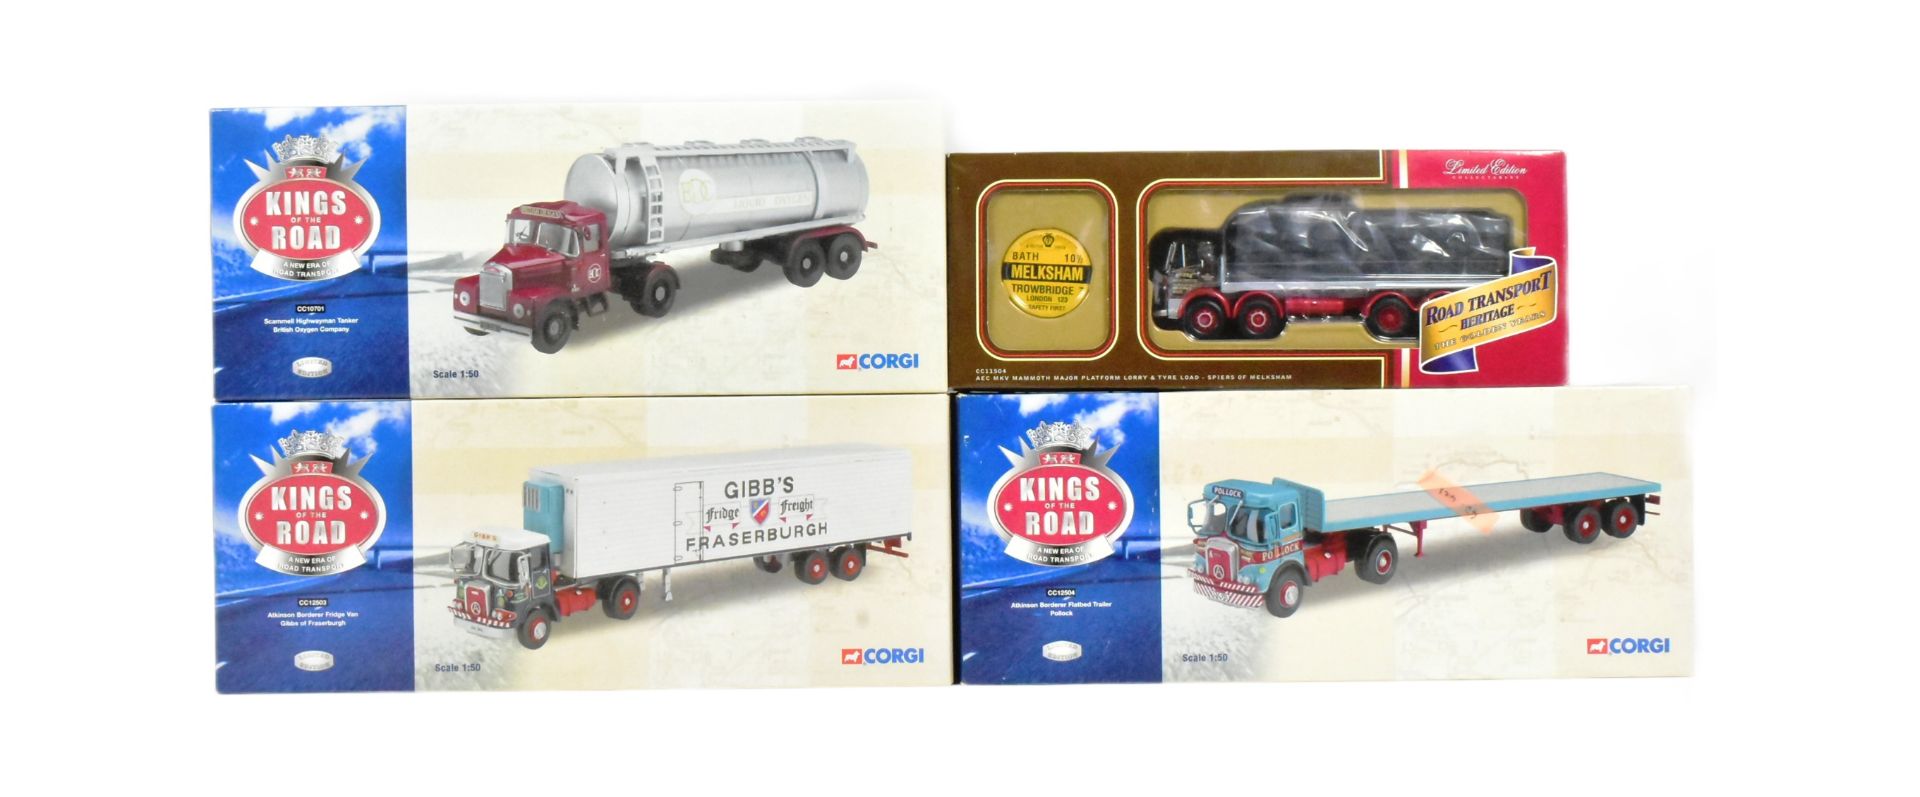 DIECAST - COLLECTION OF CORGI 1/50 SCALE DIECAST MODELS